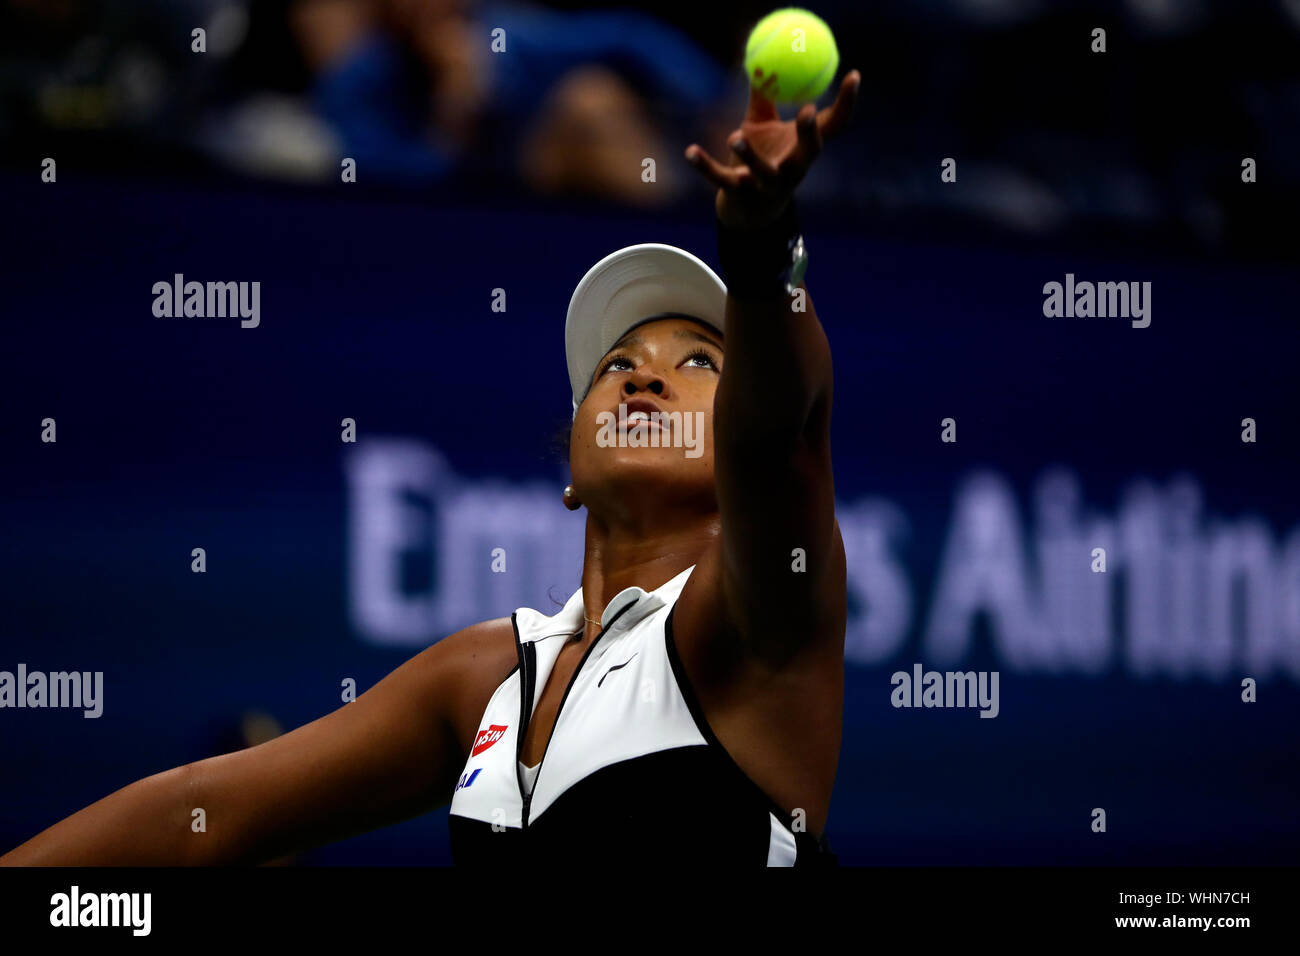 New York, United States. 02nd Sep, 2019. Flushing Meadows, New York, United States - September 2, 2019. Naomi Osaka serving to Belinda Becic of Switzerland in the fourth round at the US Open today. Osaka lost in straight sets as Becic scored an upset. Credit: Adam Stoltman/Alamy Live News Stock Photo